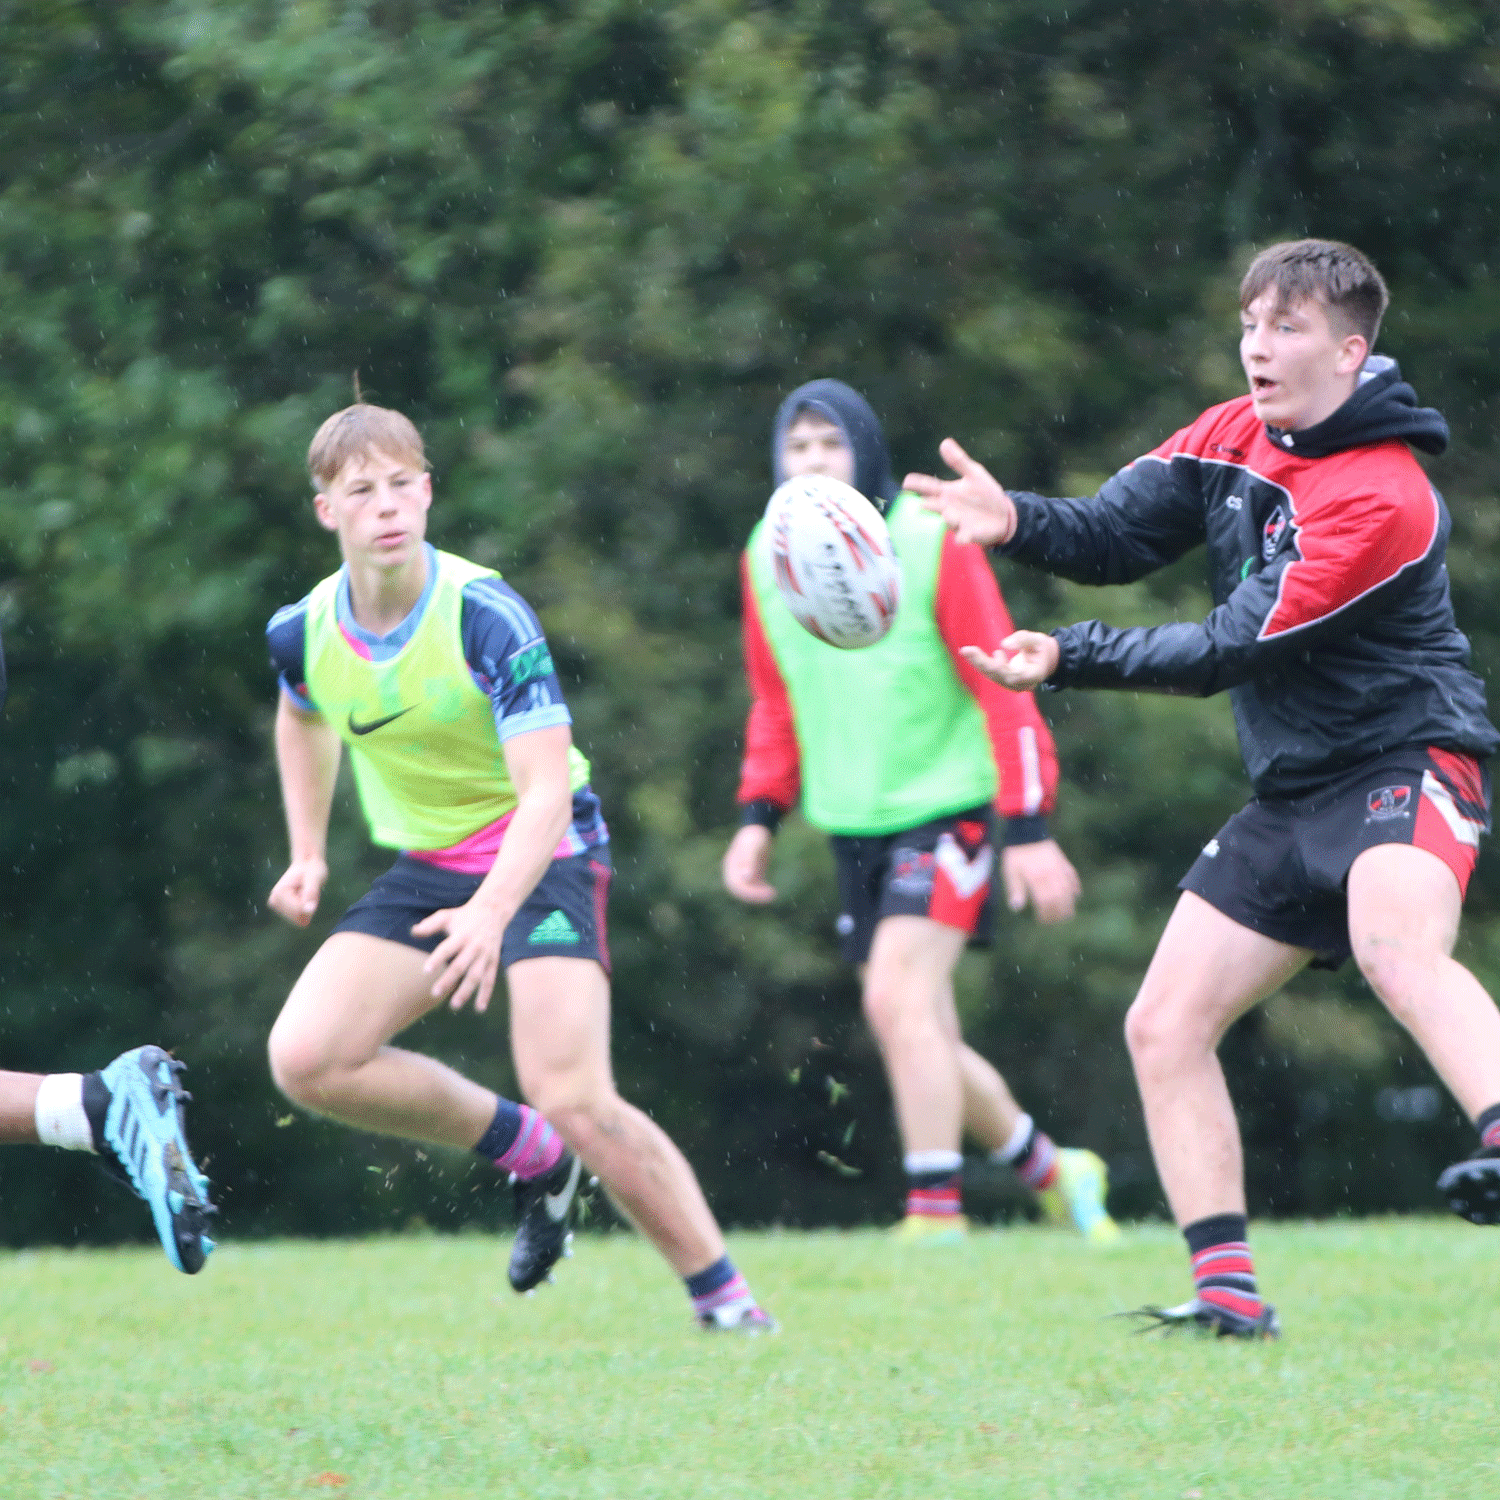 HHRFC playing rugby